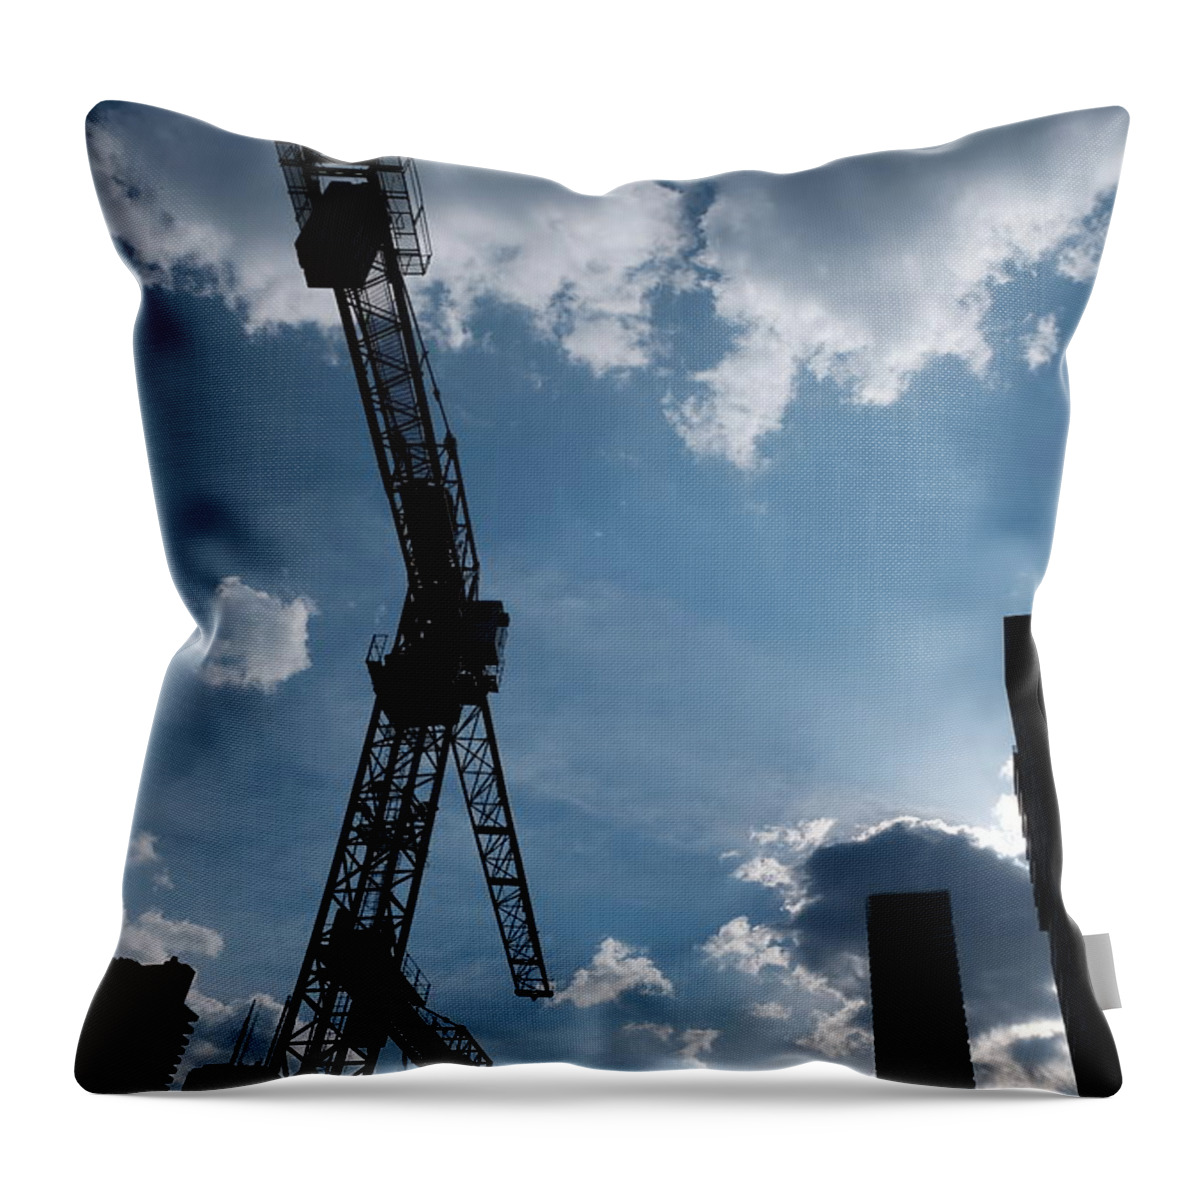 Sky Throw Pillow featuring the photograph The Future Looks The Same by Kreddible Trout